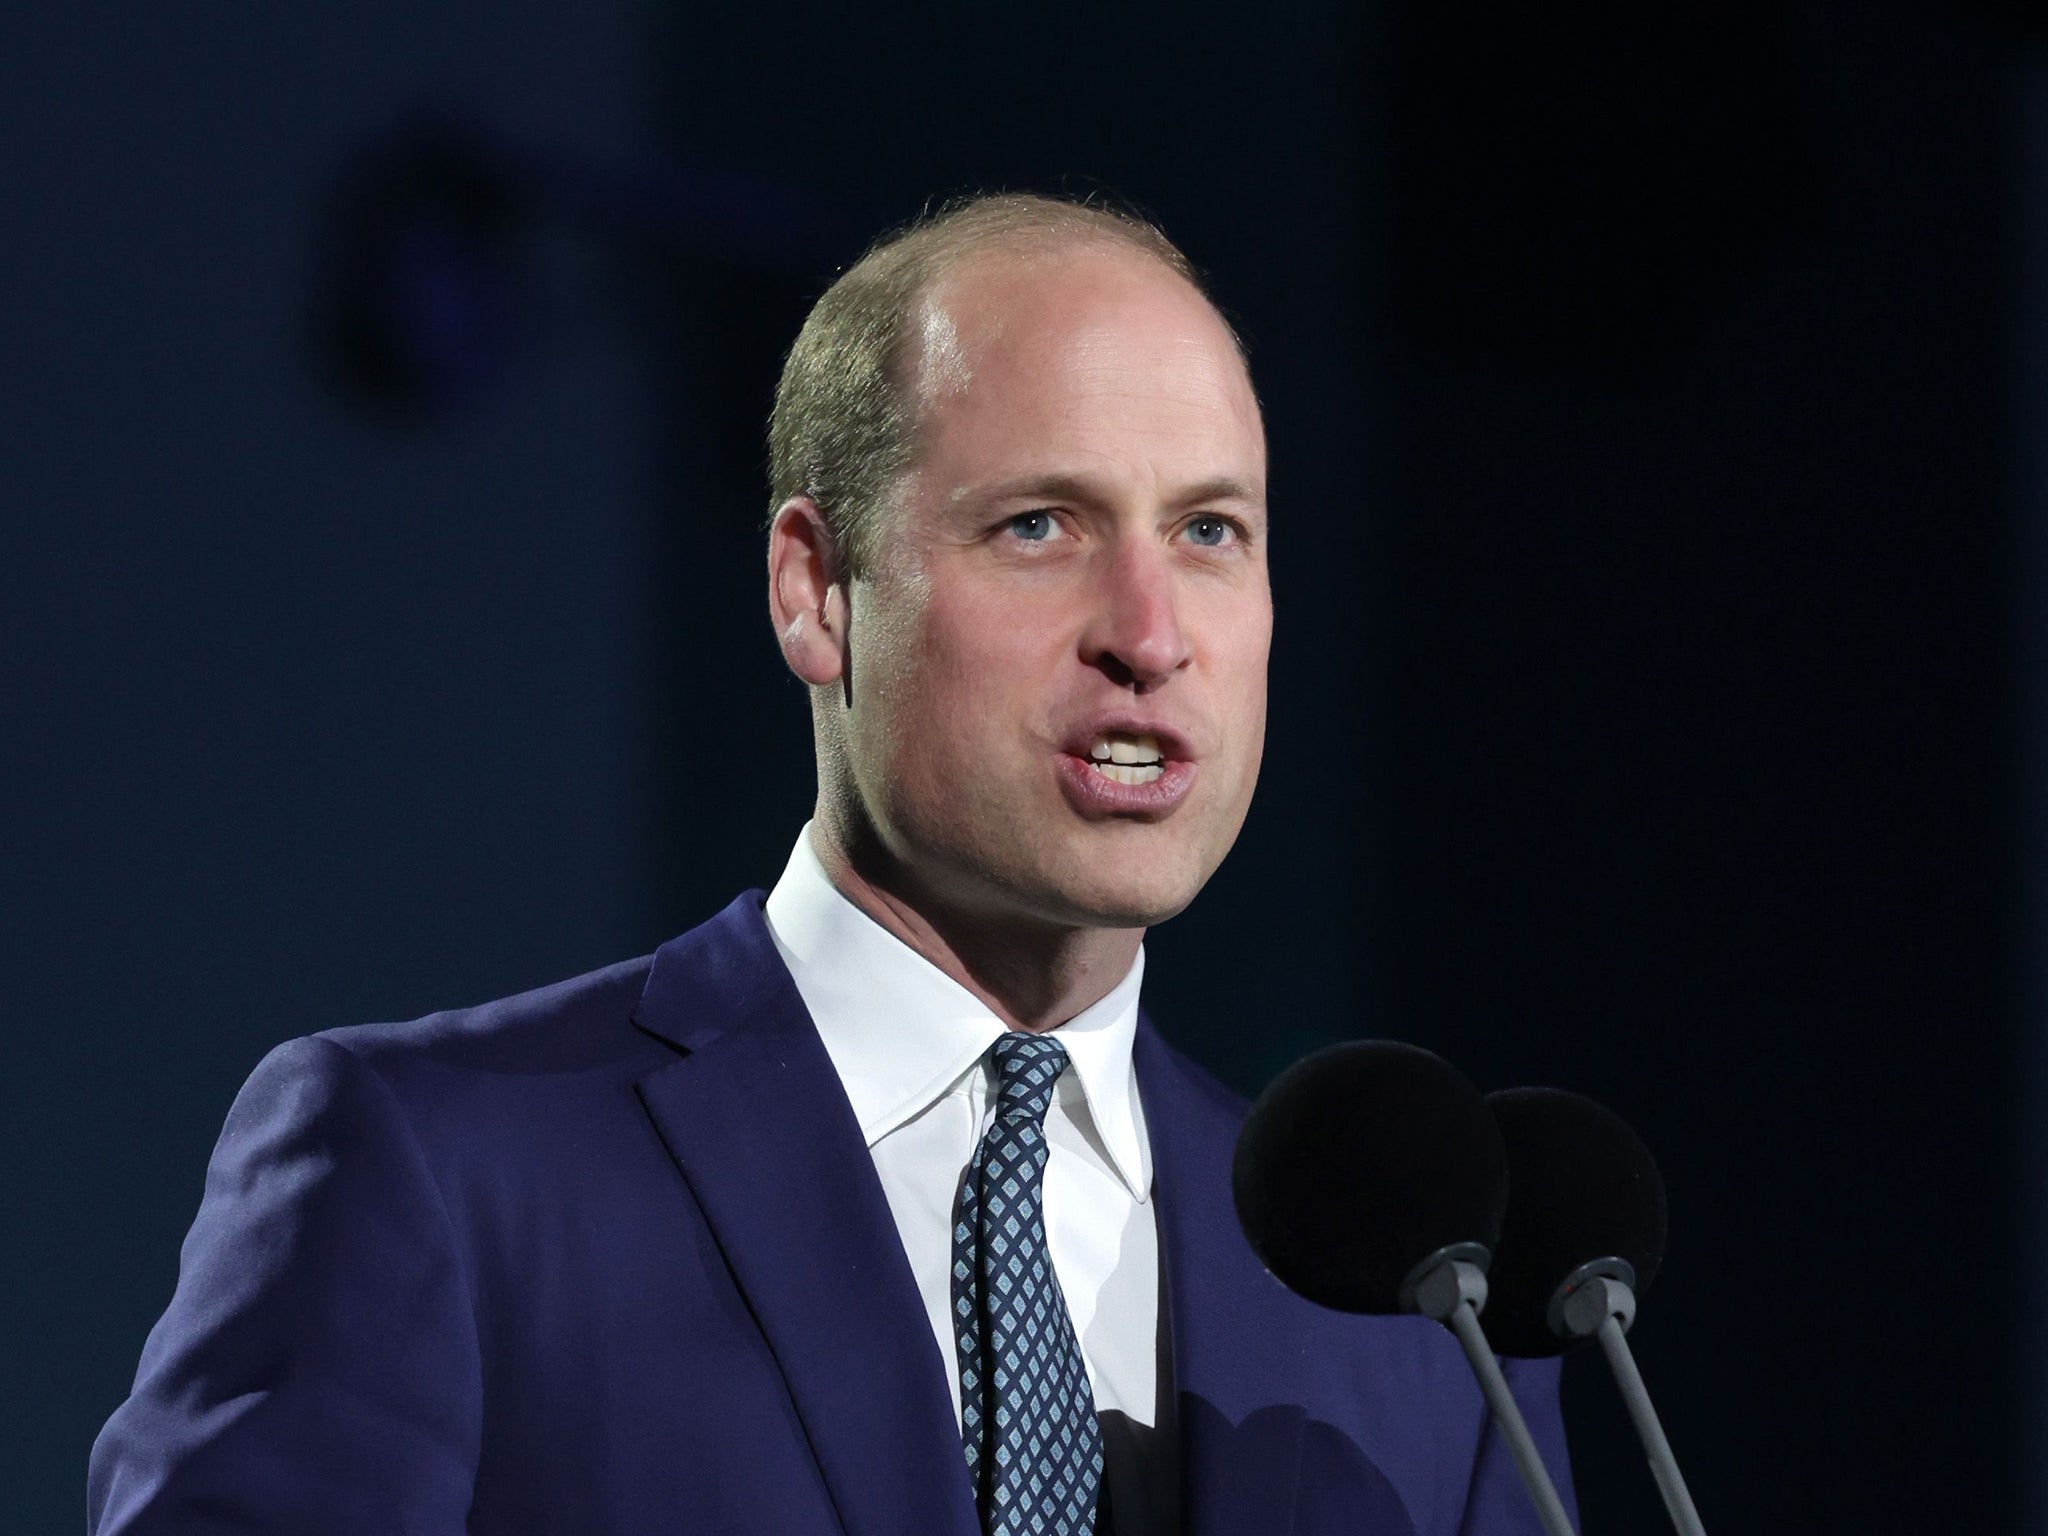 Prince William said child trauma victims deserved to have their voices heard